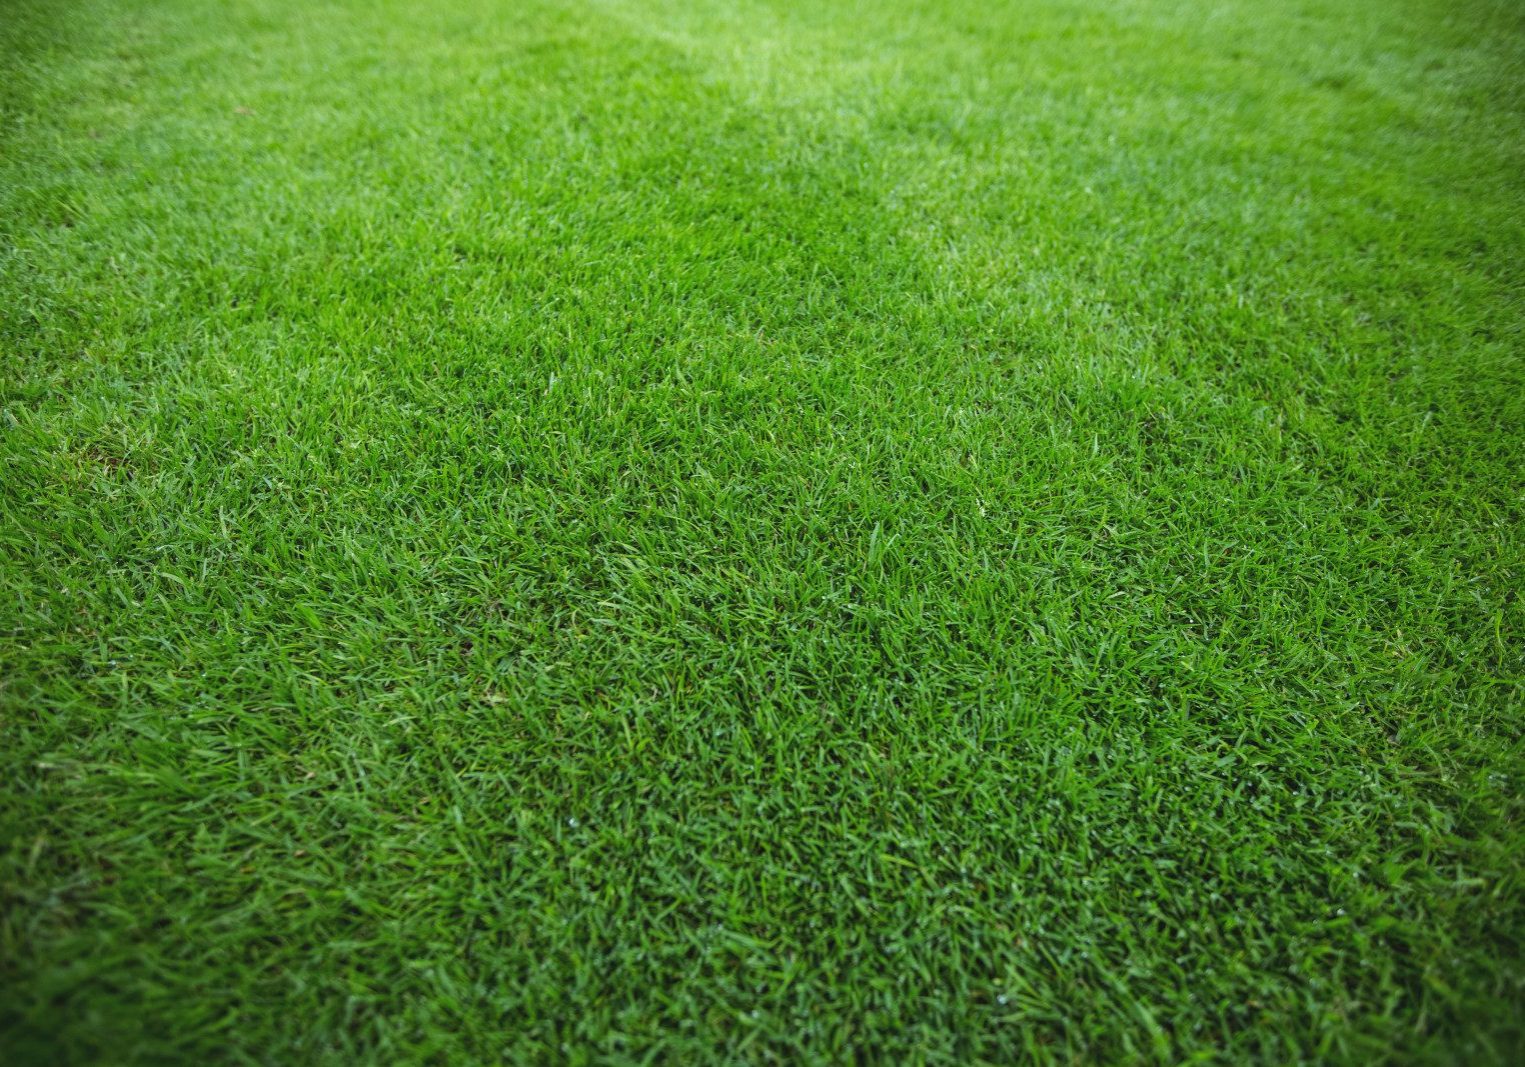 A close up of a green grass field showcasing the beautiful landscaping.